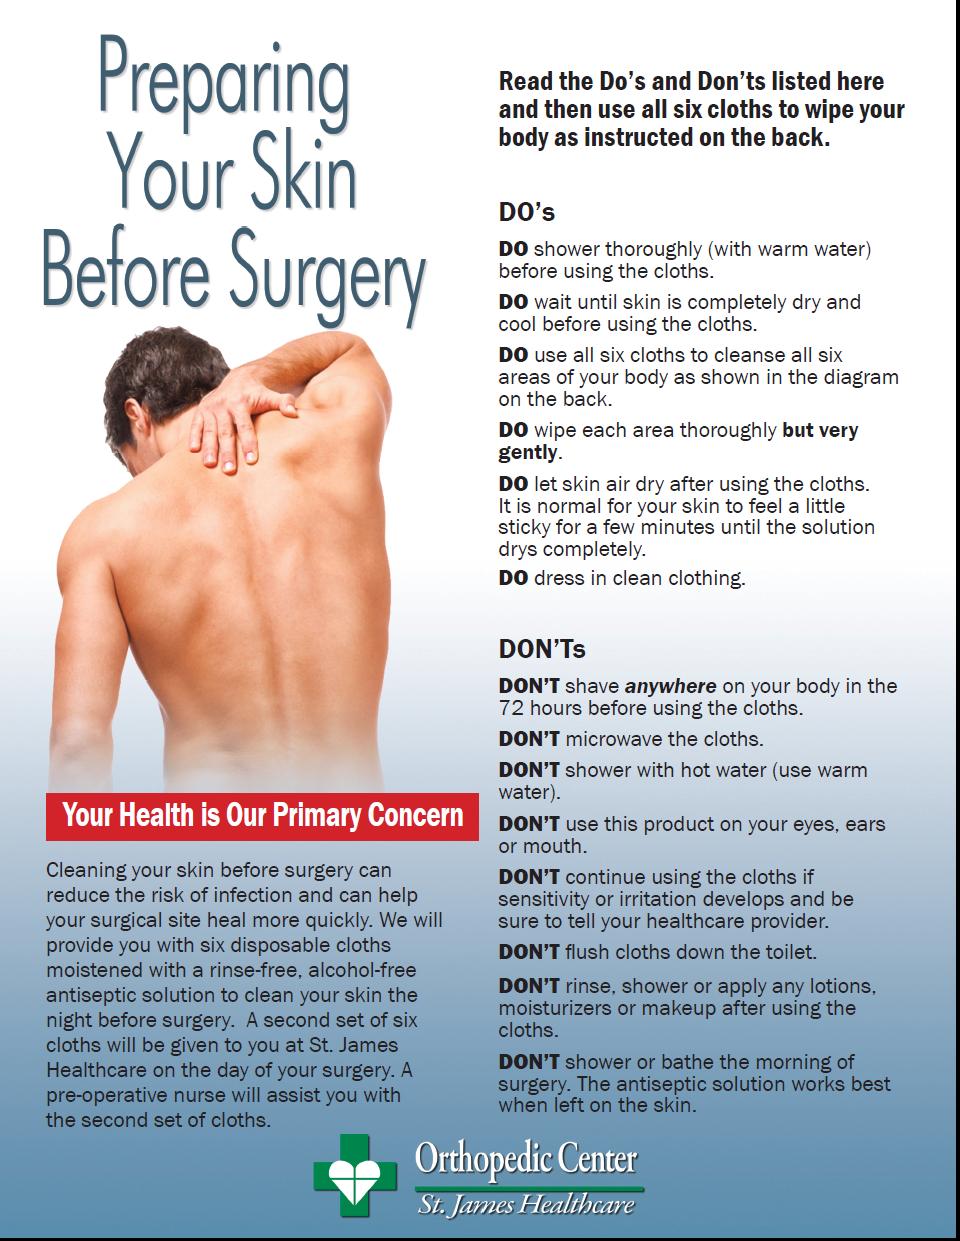 INFECTION PREVENTION Page 4 Preparing Your Skin Before Surgery: